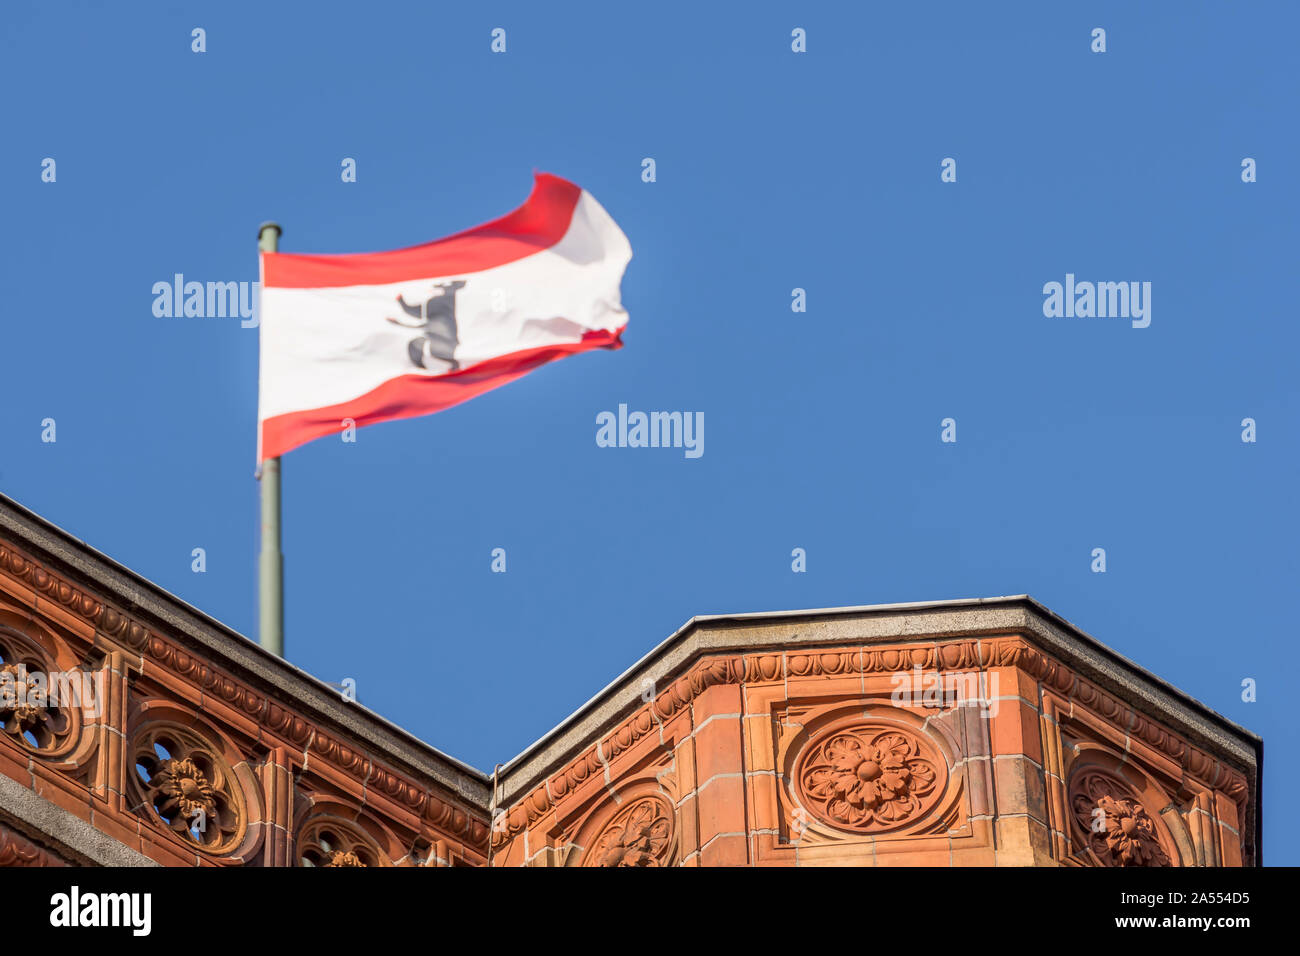 A detail of the Red Town Hall (Rotes Rathaus) of Berlin on which the Berlin flag is flying, Germany Stock Photo